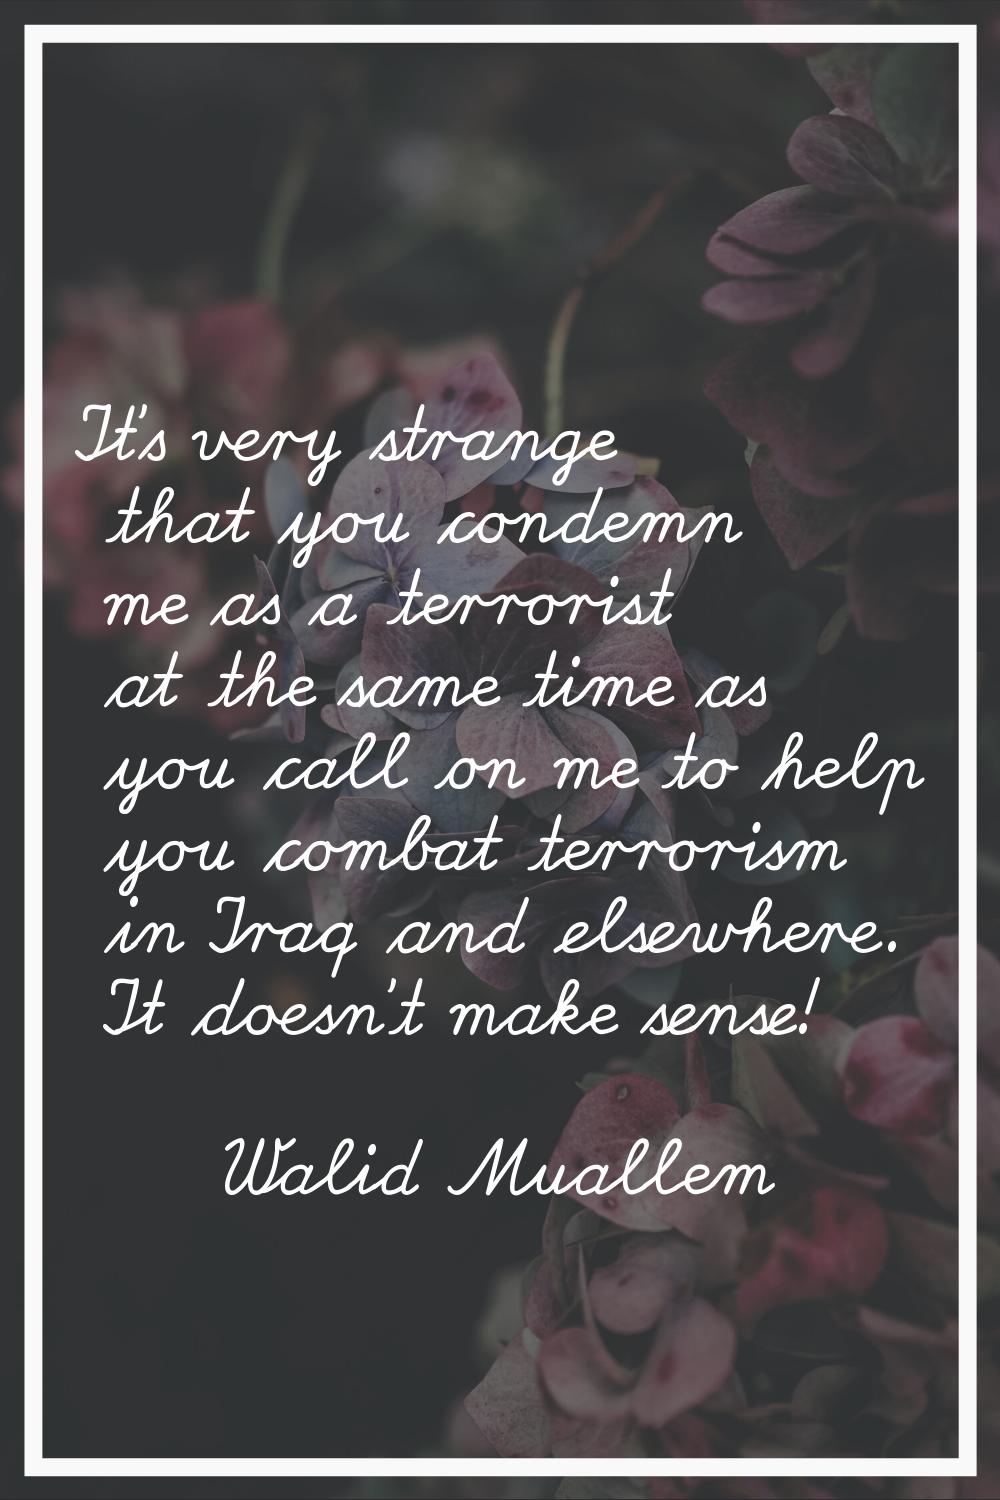 It's very strange that you condemn me as a terrorist at the same time as you call on me to help you